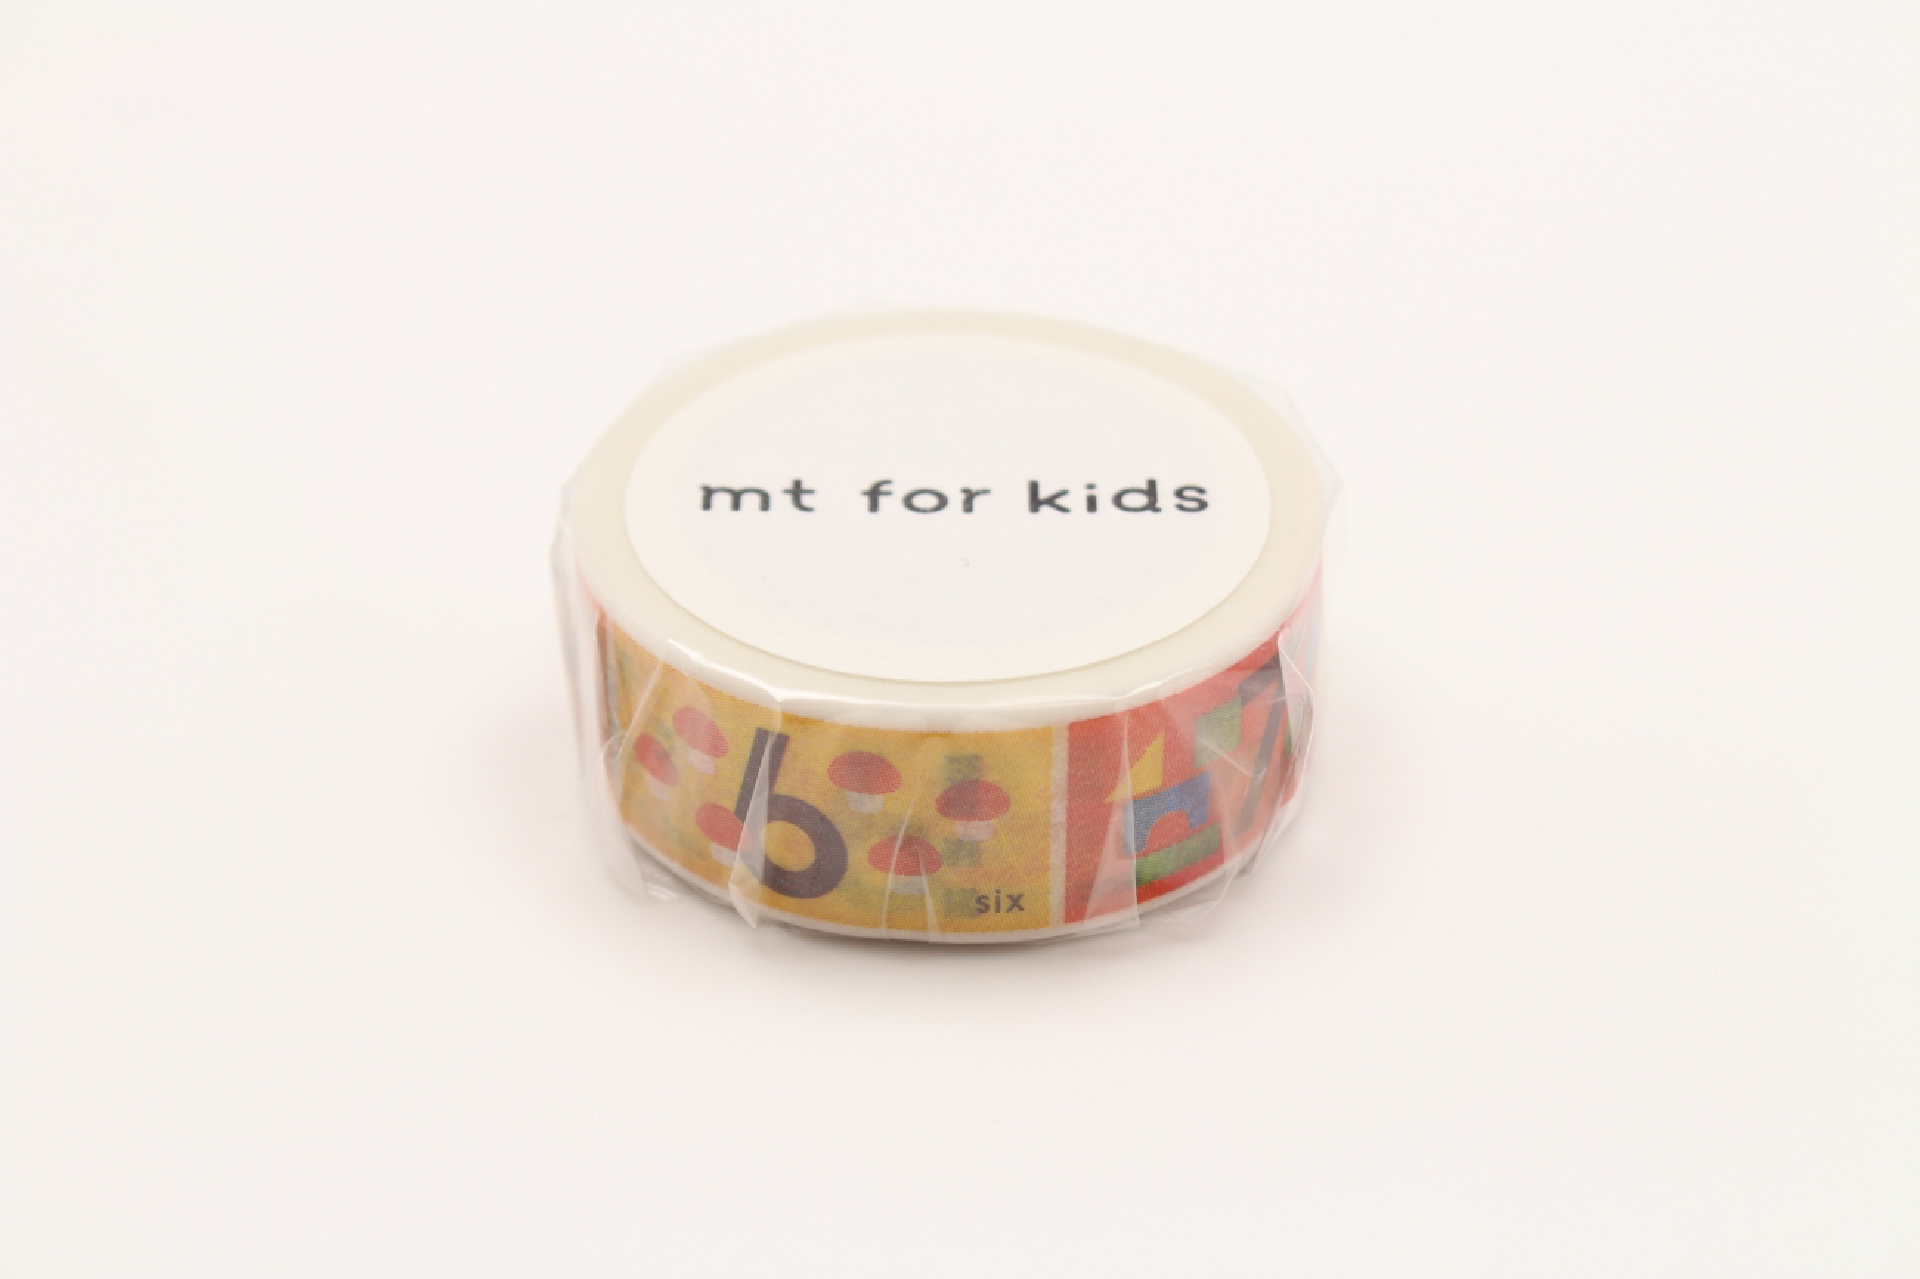 mt for kids キッズすうじ | mt mt for kids | マスキングテープ「mt